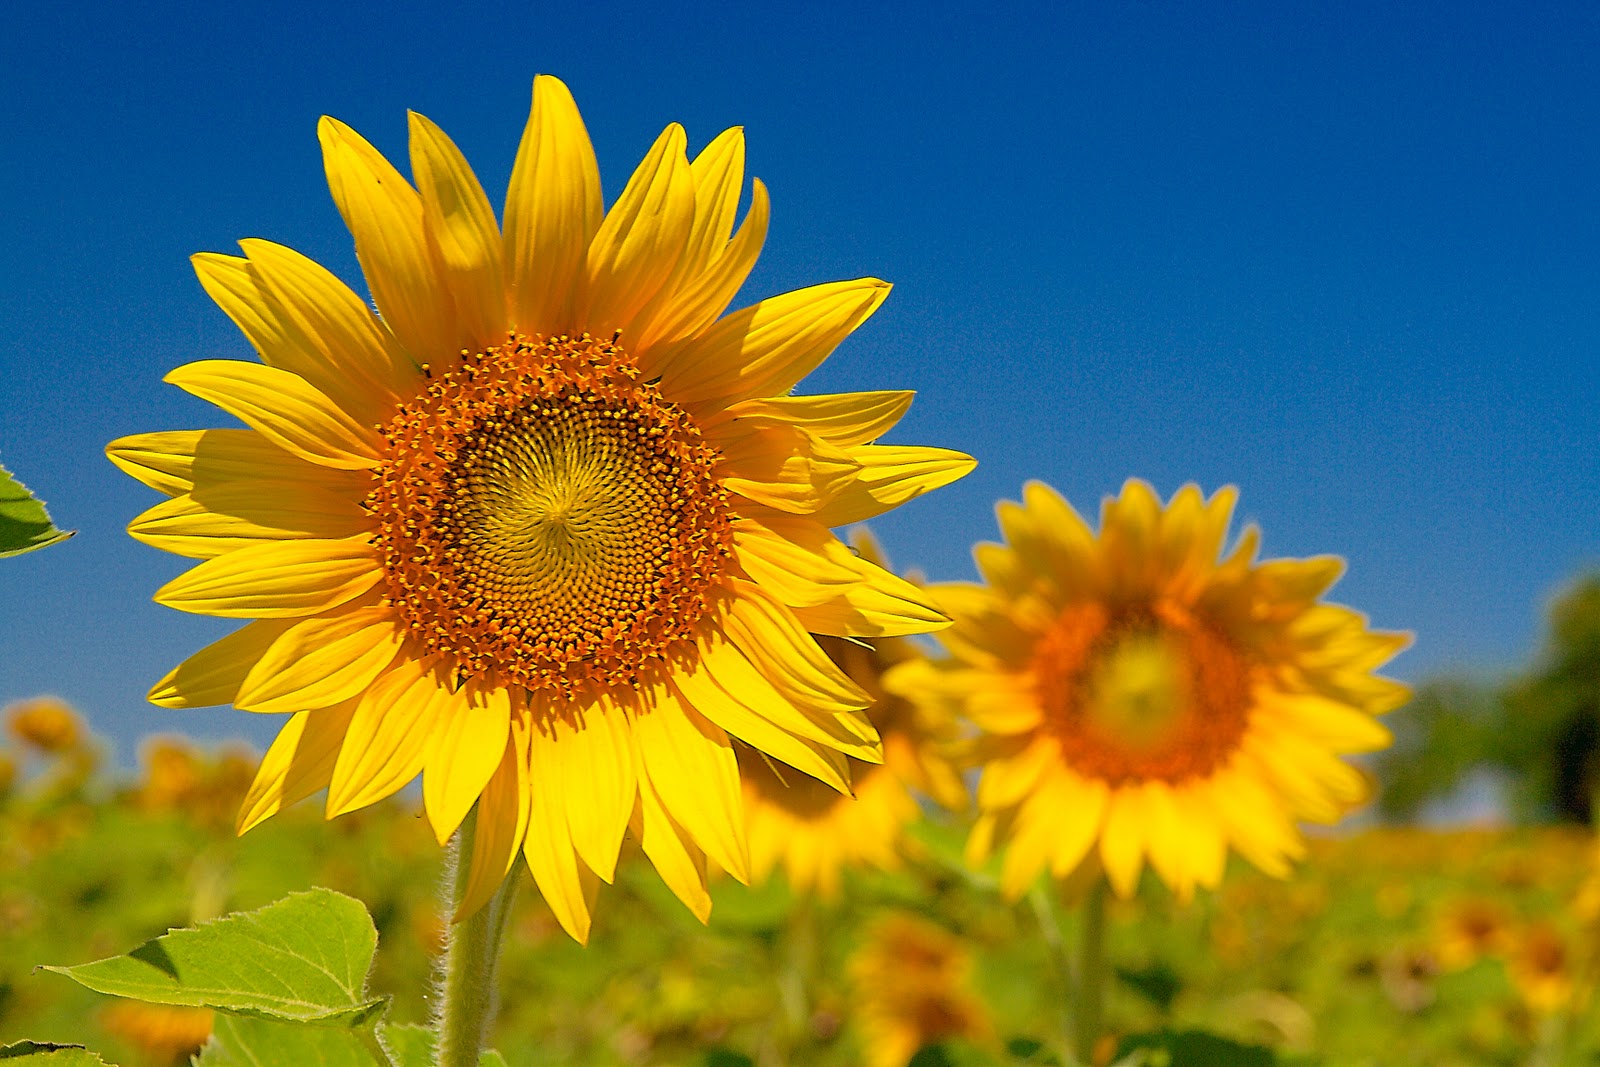 Super trip of awesome: Khao Yai National Park (And some sunflowers)